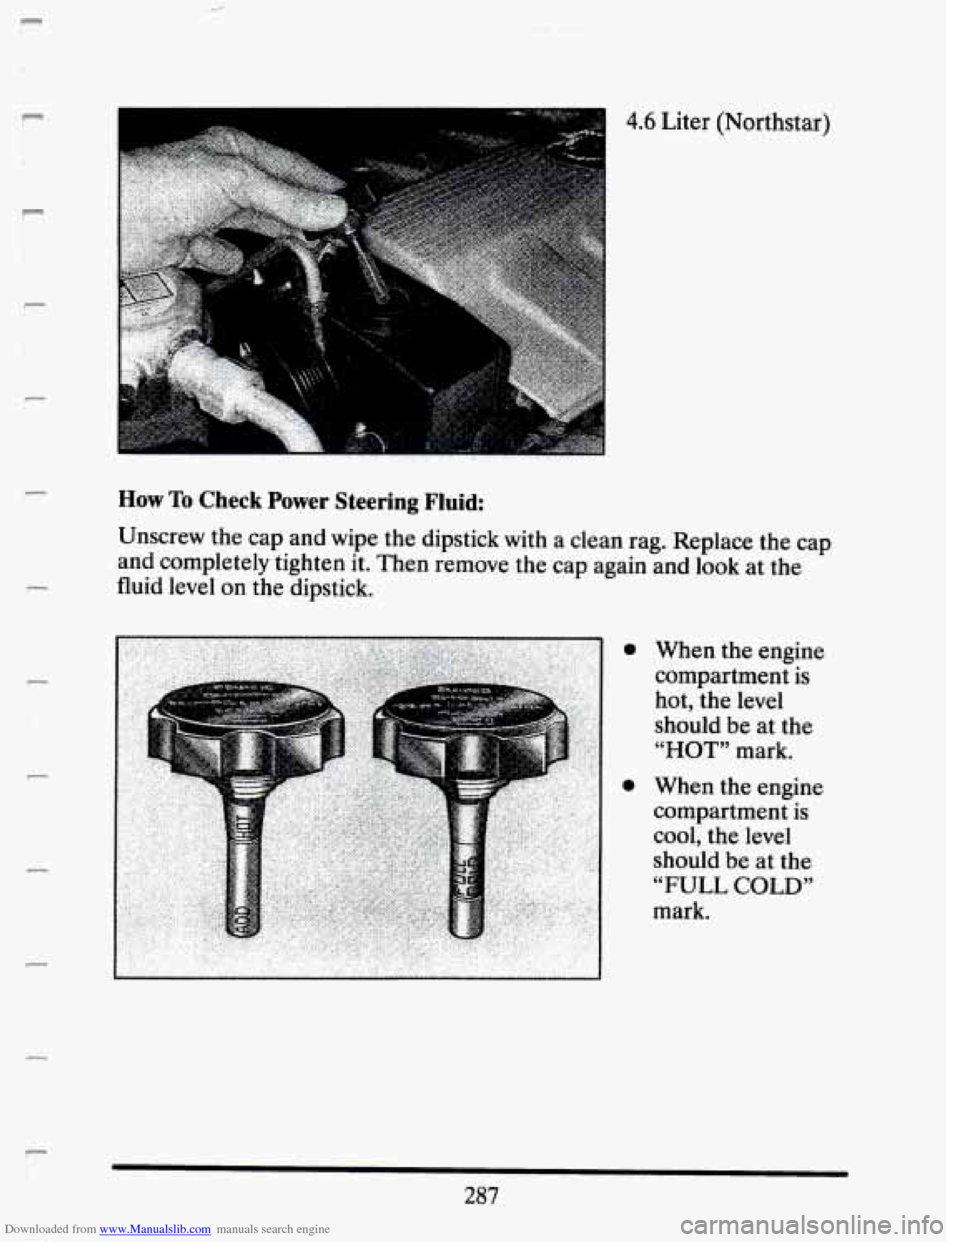 CADILLAC SEVILLE 1993 4.G Owners Manual Downloaded from www.Manualslib.com manuals search engine P 
L 
r 
r 
c 
P 
P 
c 
P 
I. 
How To Check Power Steering Fluid: 
4.6 Liter (Northstar) 
Unscrew  the cap and  wipe the dipstick  with  a clea